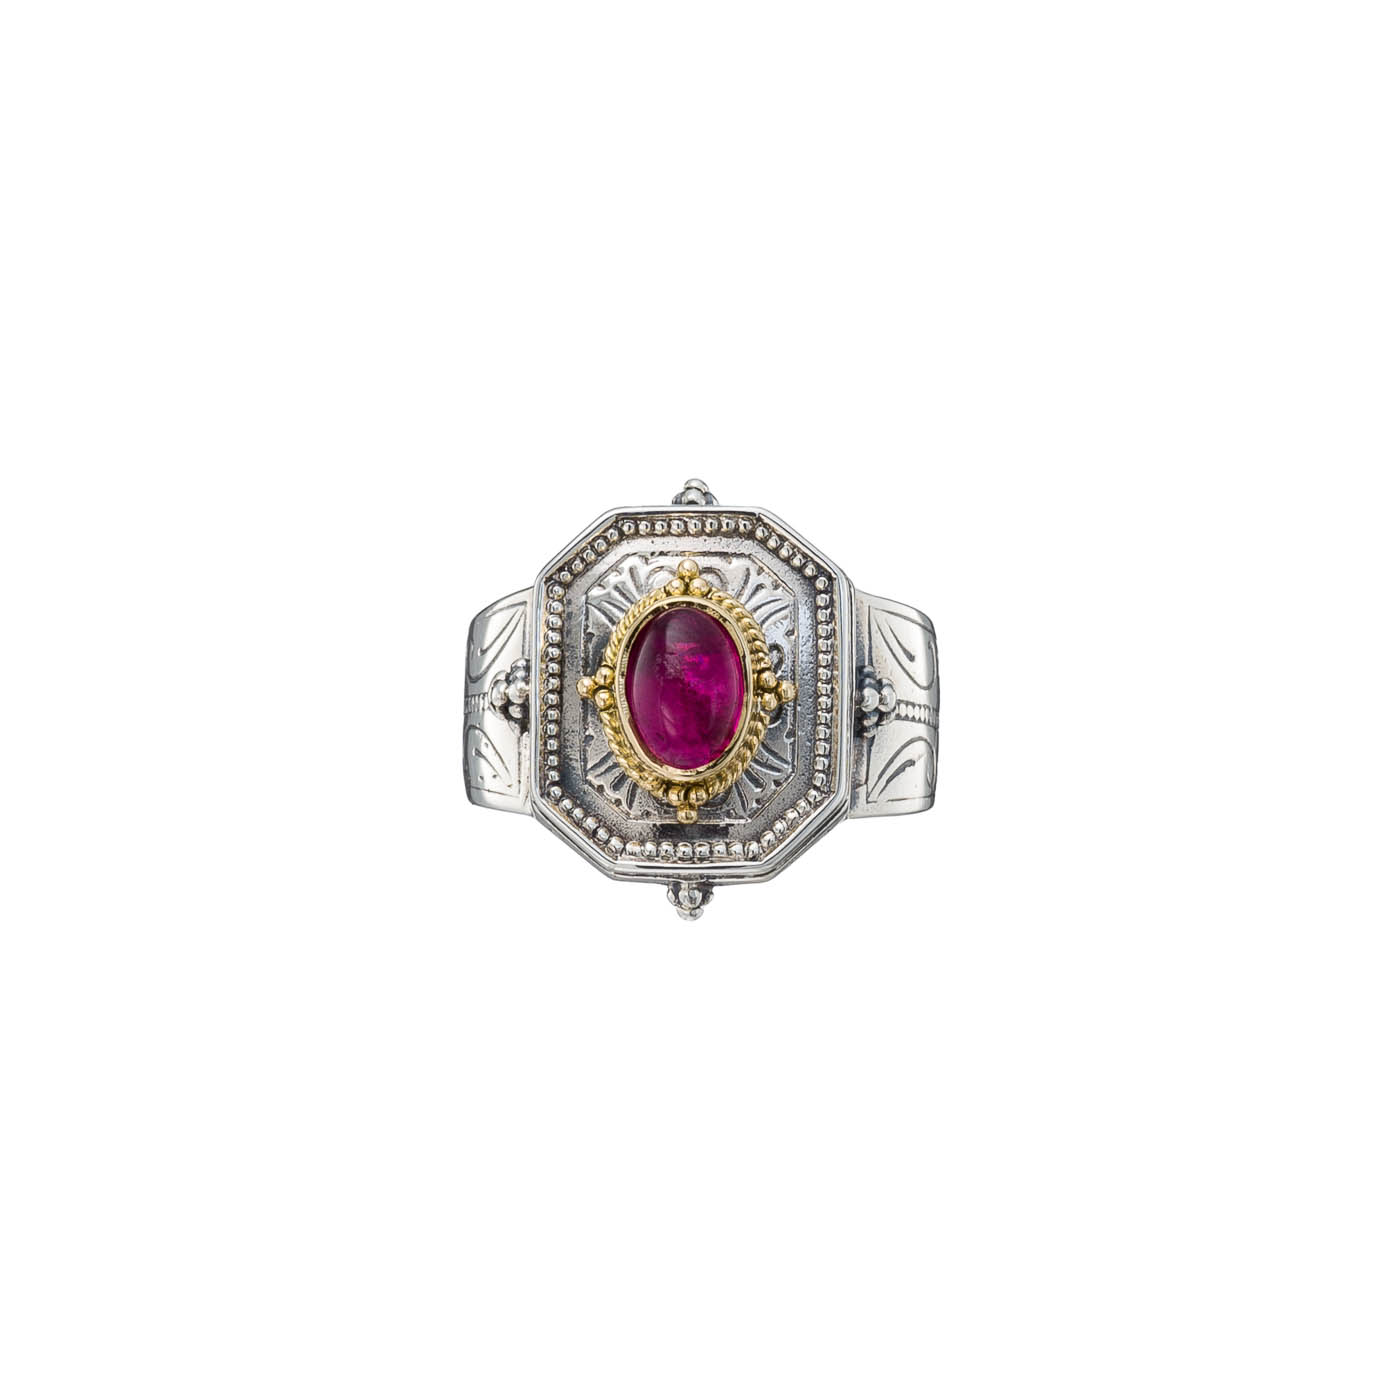 Cyclades Ring in 18K Gold and sterling silver with pink tourmaline